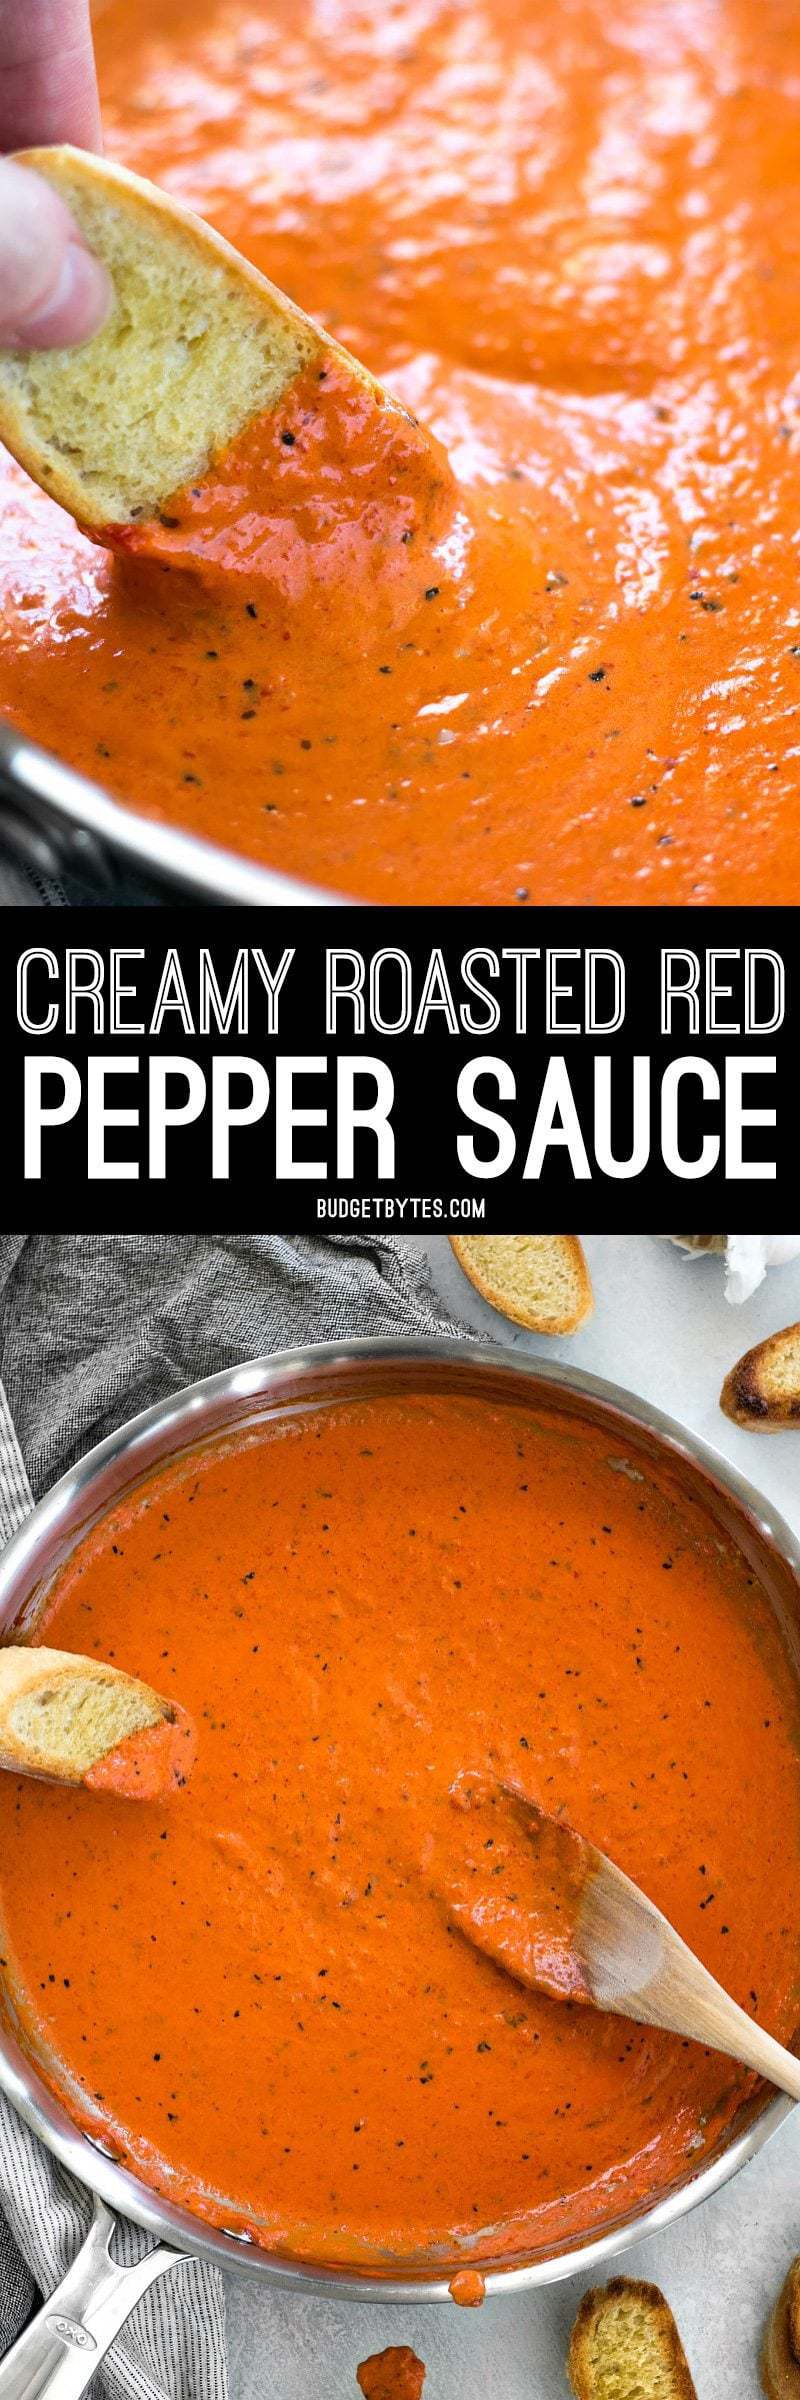 Creamy Roasted Red Pepper Sauce is a great alternative to tomato based sauces for pasta, pizzas, or just for dipping your favorite crusty bread. BudgetBytes.com